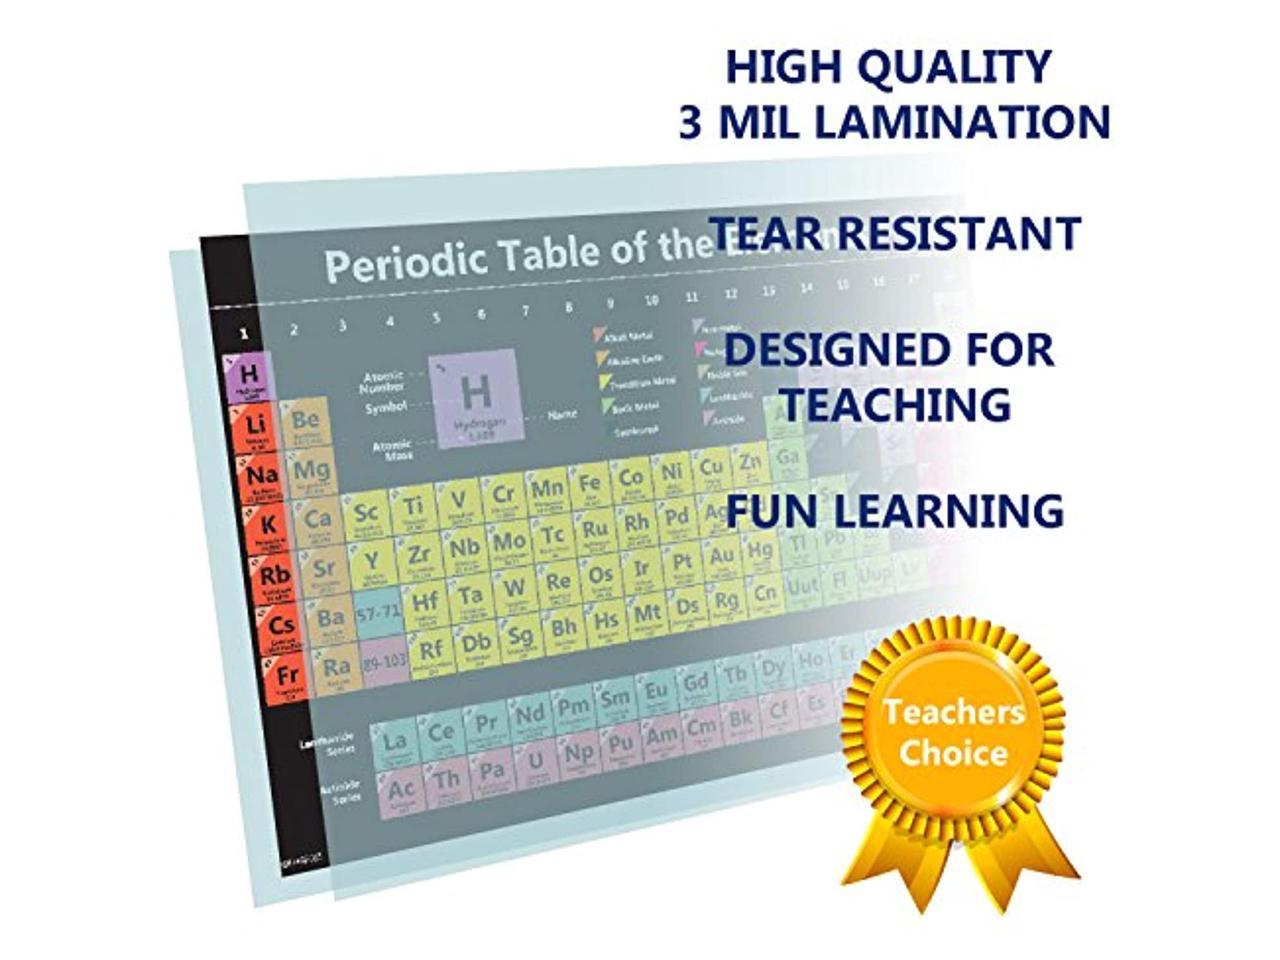 Periodic Table Science Poster Laminated Chart Teaching Elements Classroom White Decoration Premium Educators Atomic Number Guide 15x20 